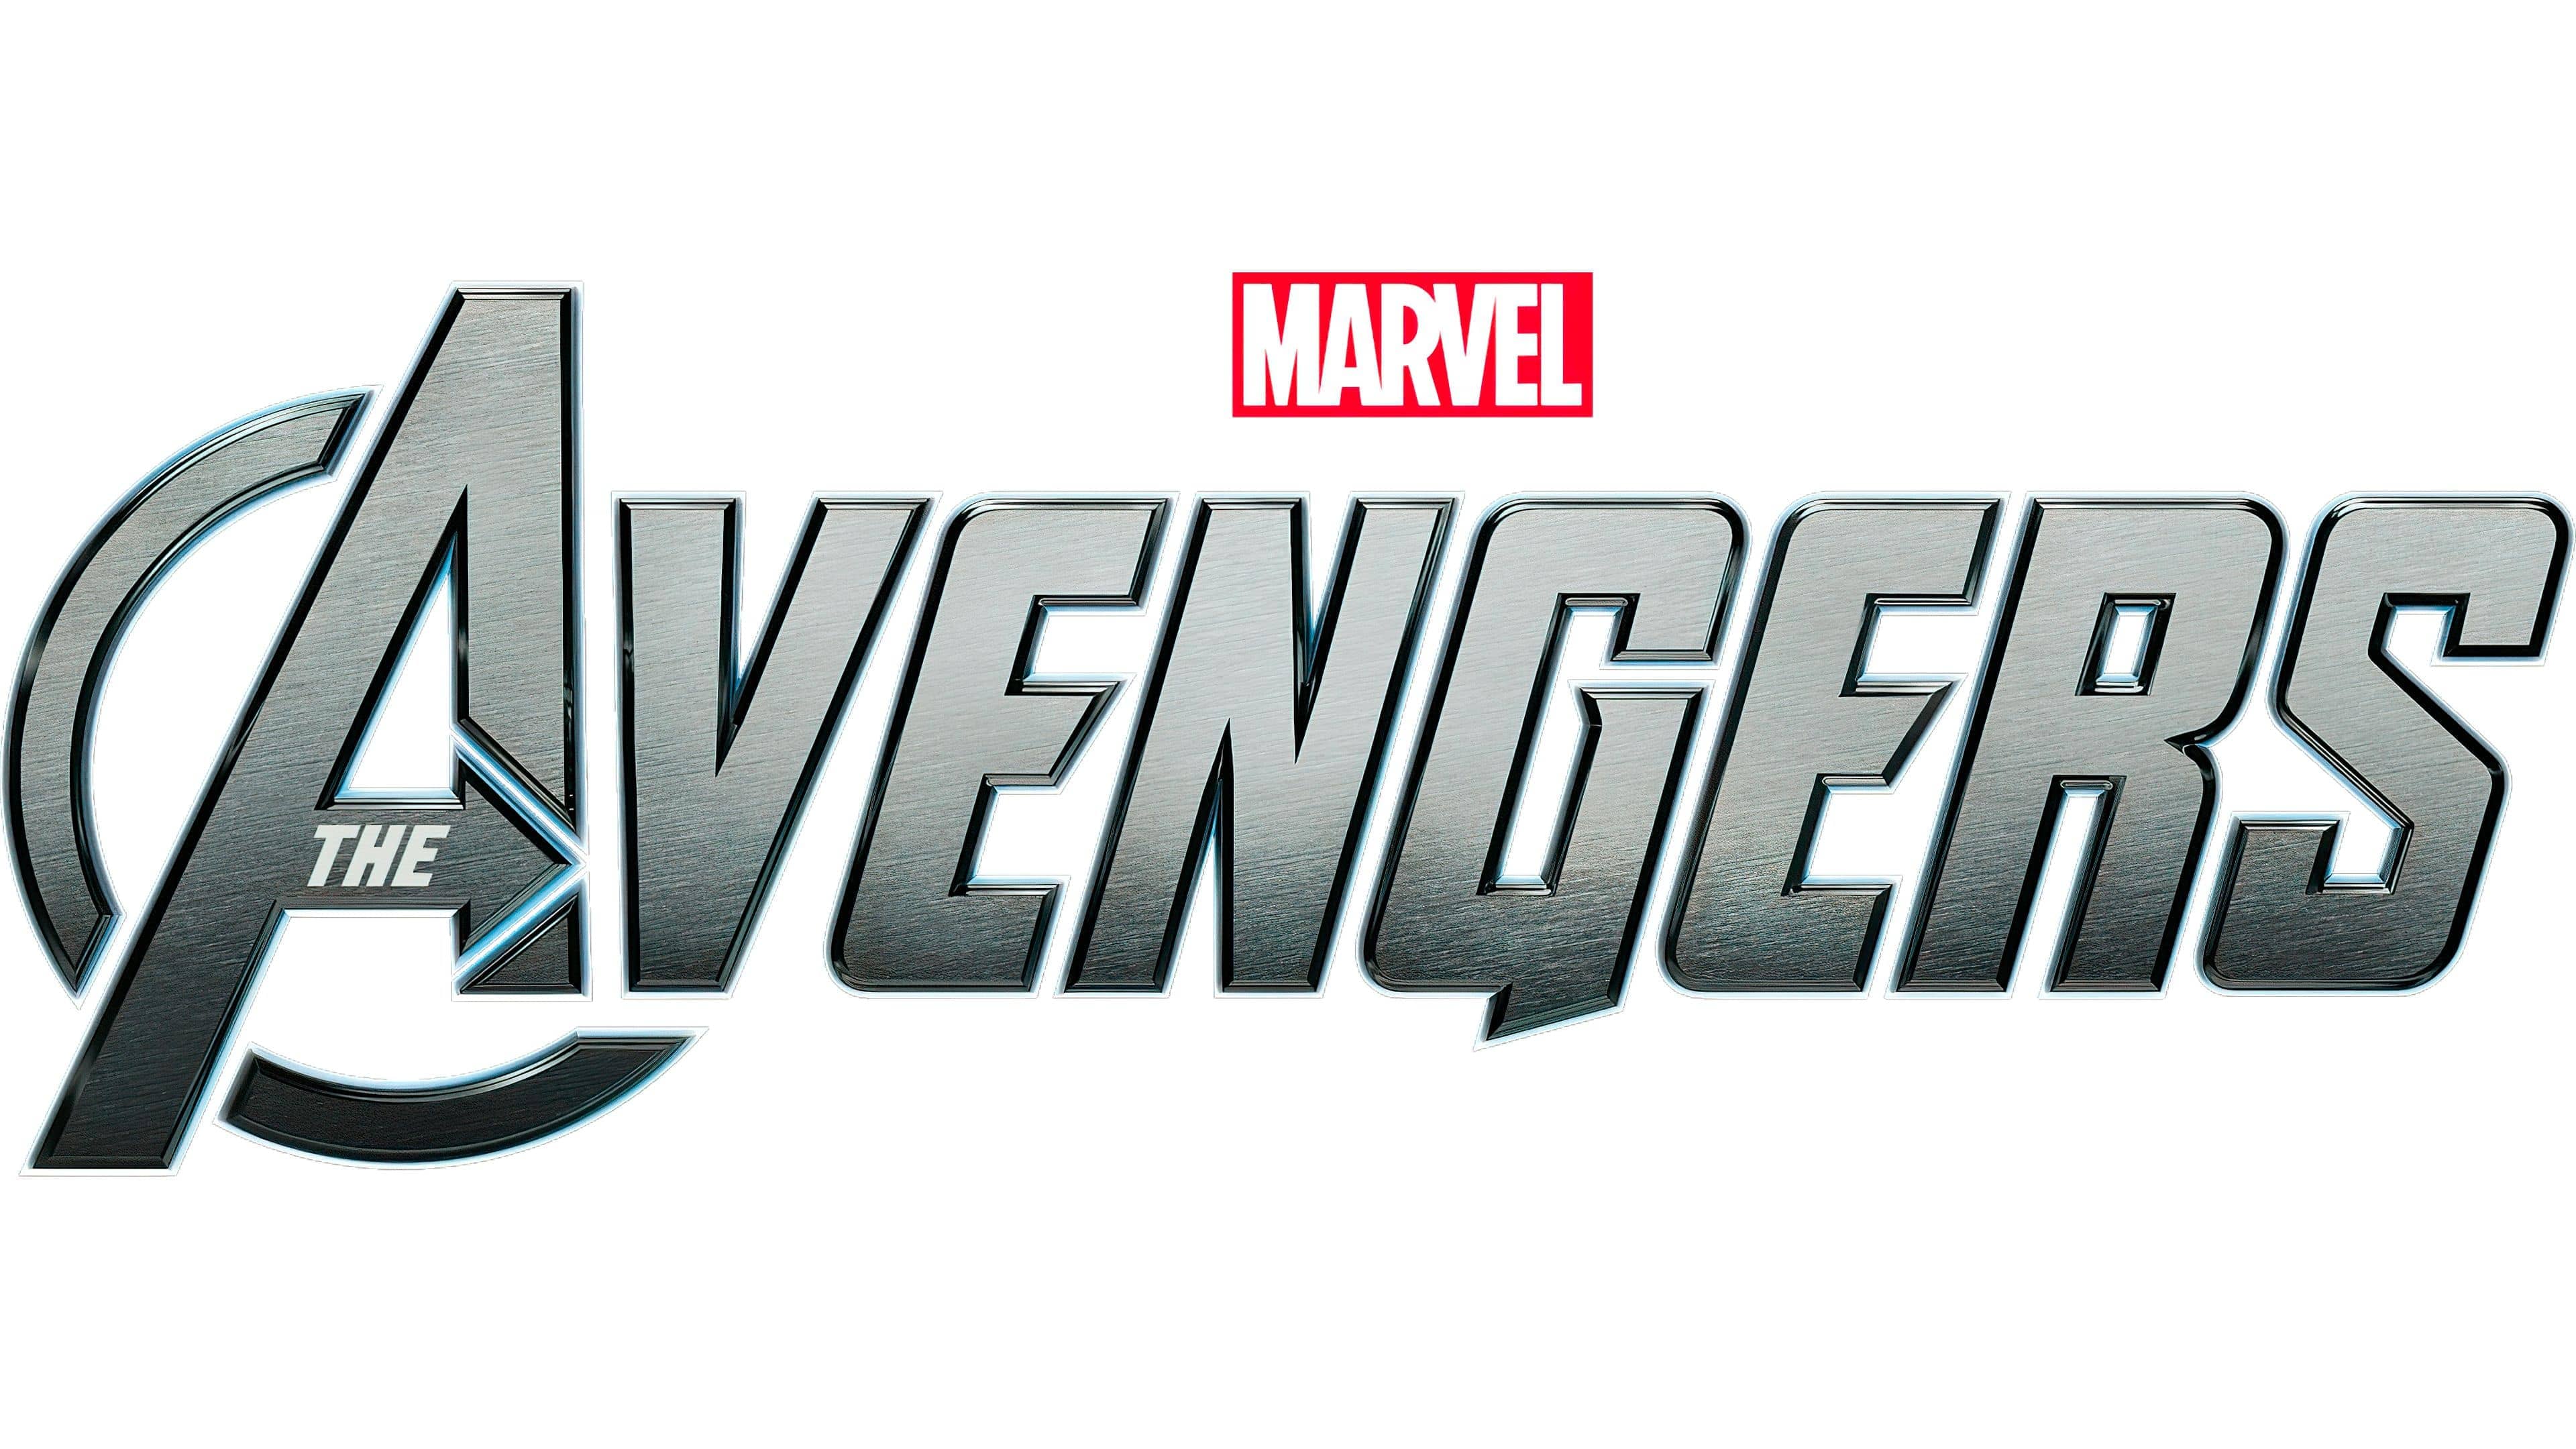 Avengers logo download in SVG or PNG - LogosArchive